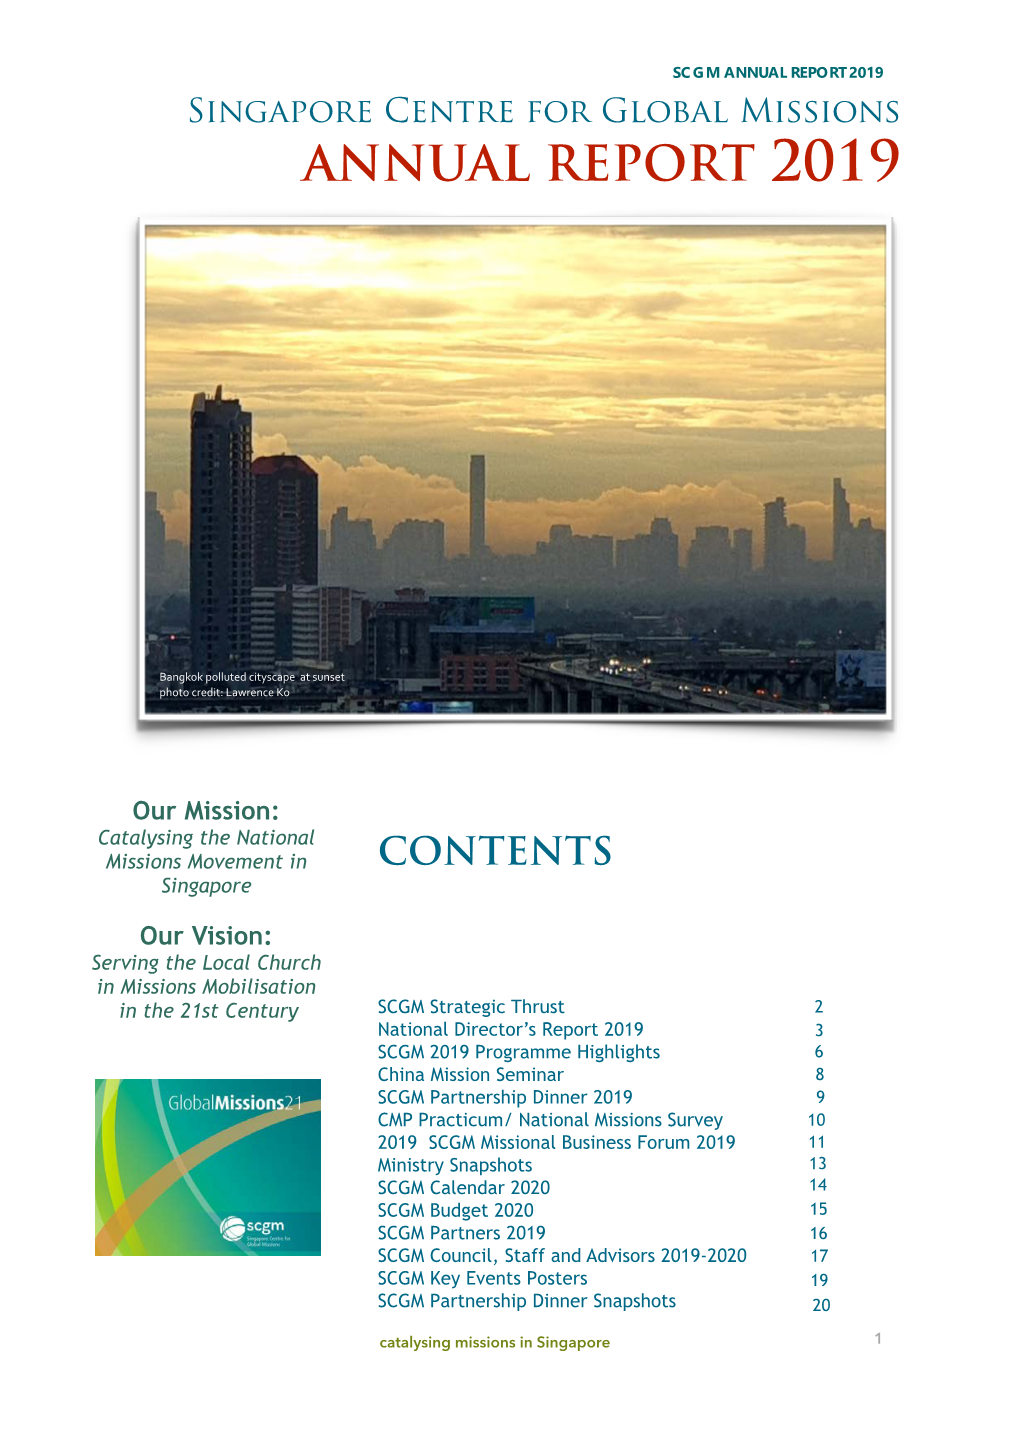 SCGM ANNUAL REPORT 2019 Singapore Centre for Global Missions ANNUAL REPORT 2019